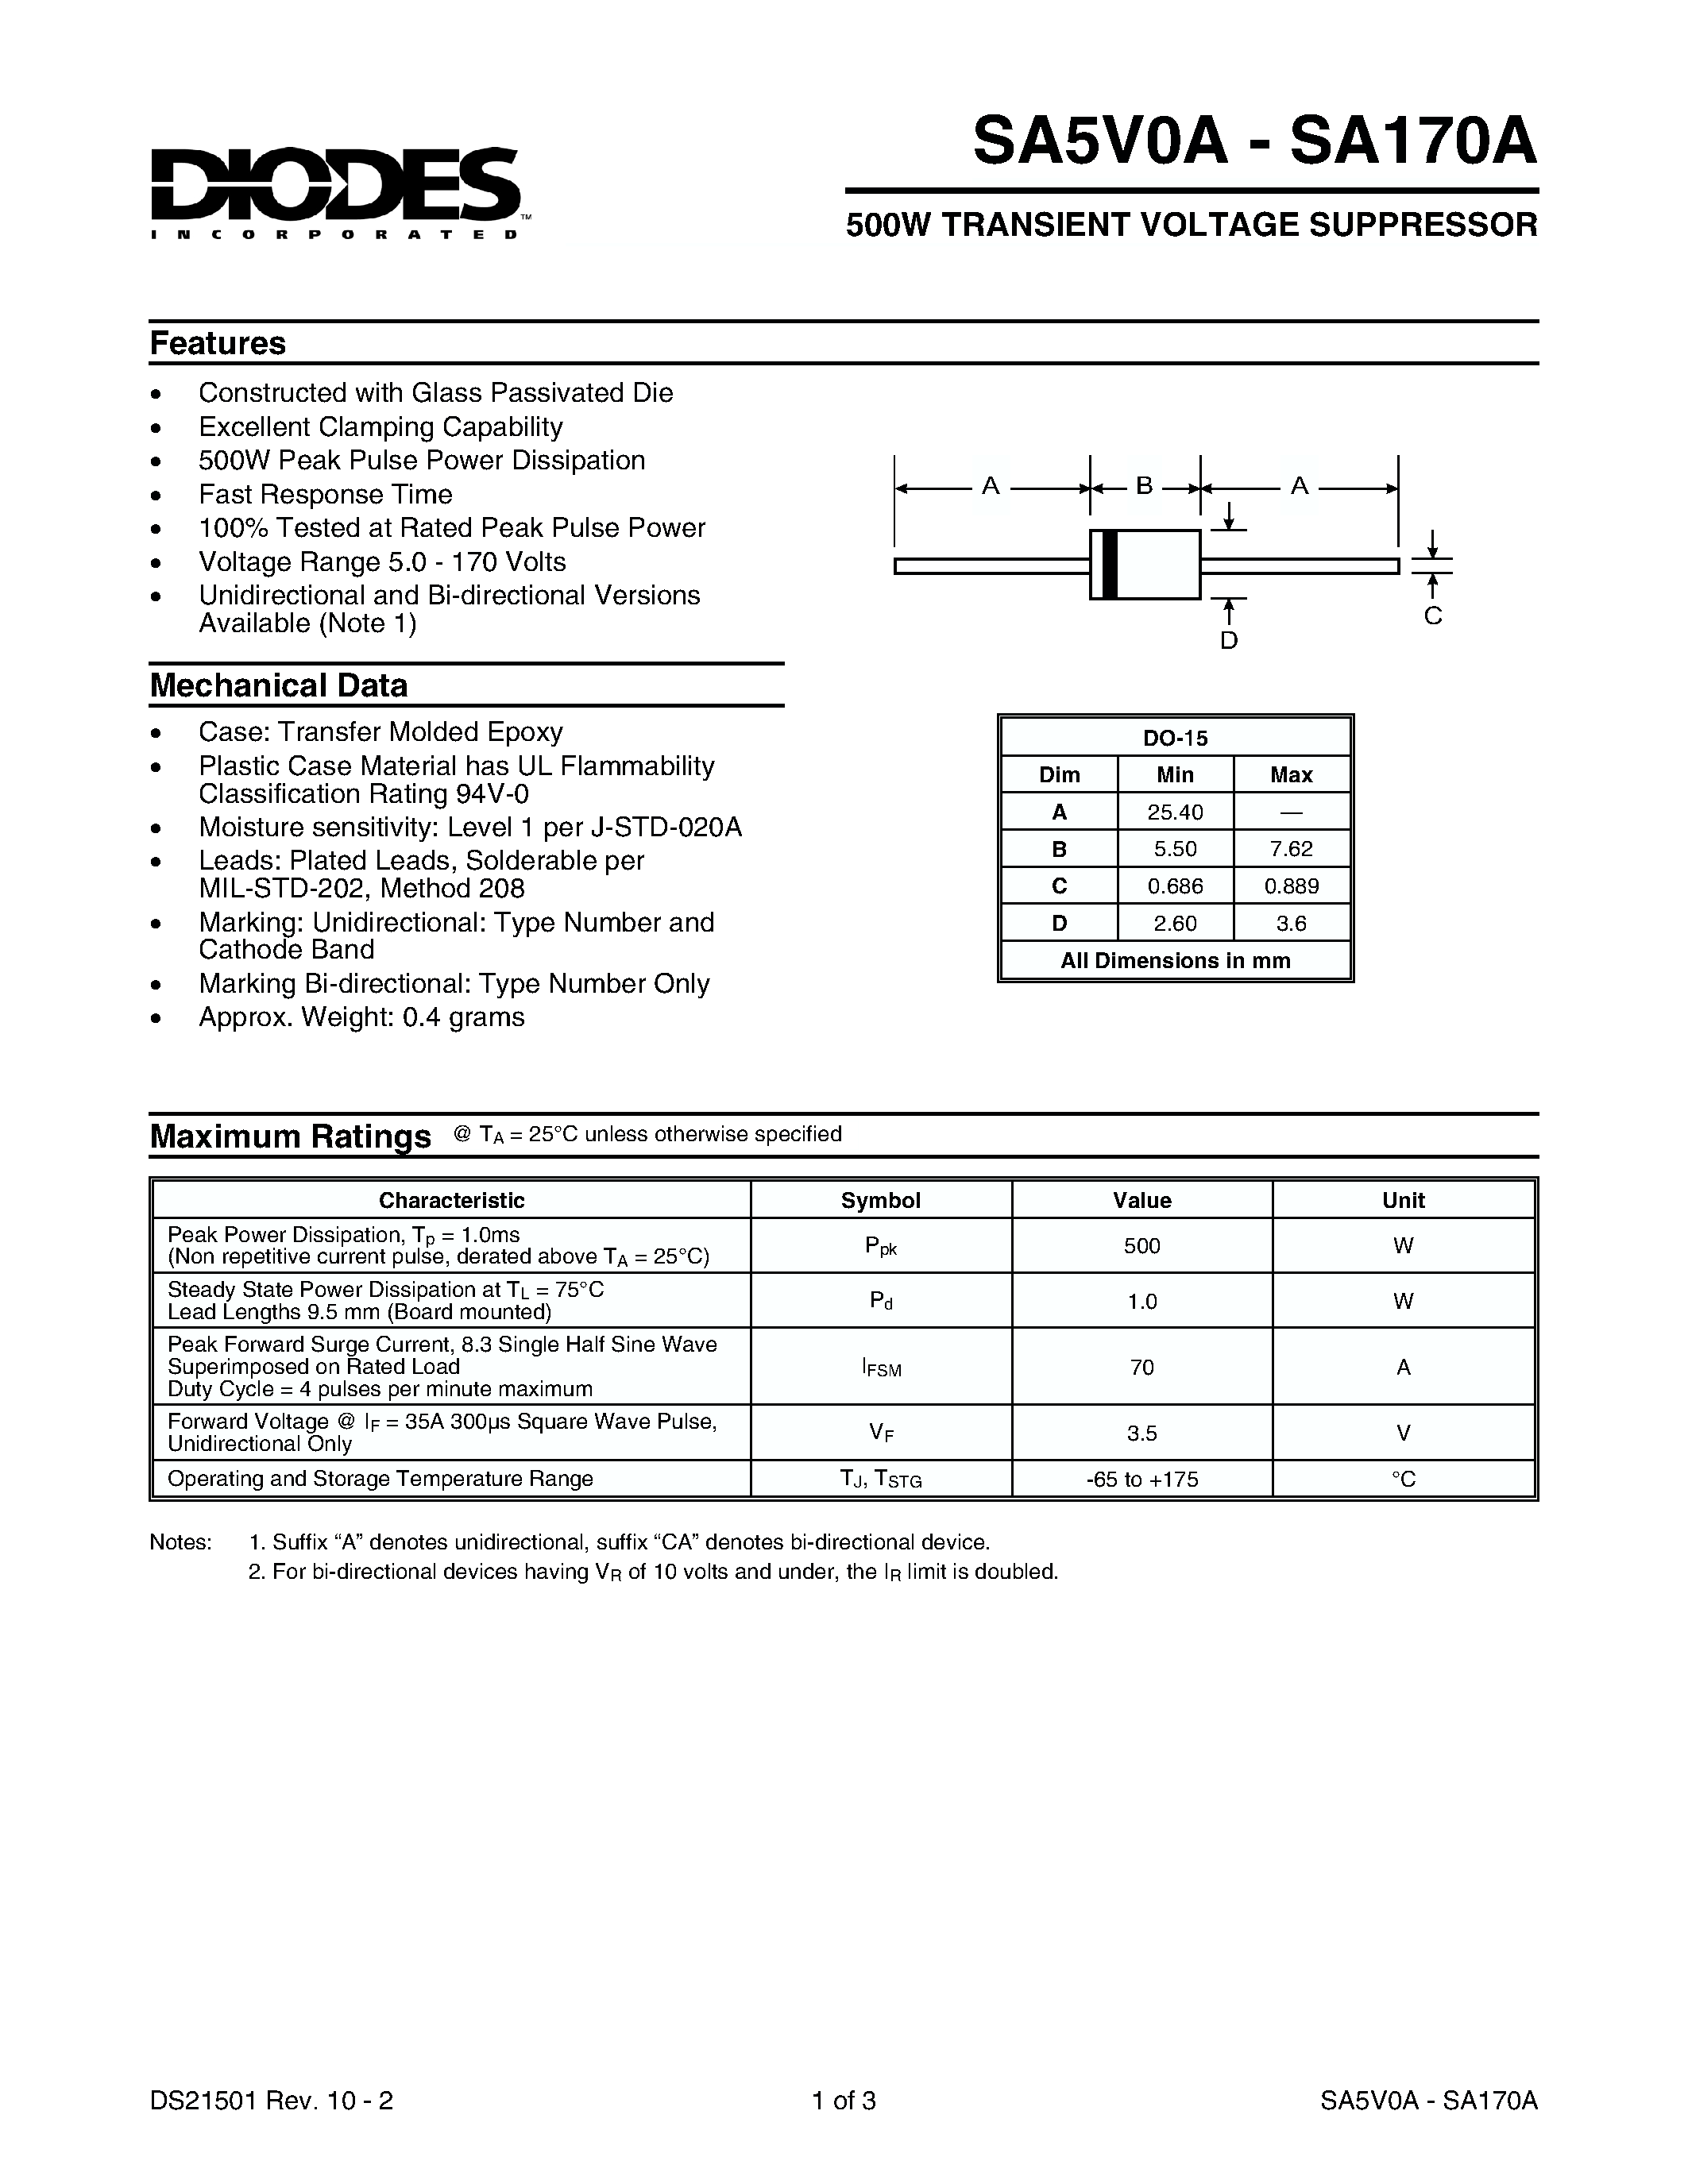 Datasheet SA100A - 500W TRANSIENT VOLTAGE SUPPRESSOR page 1